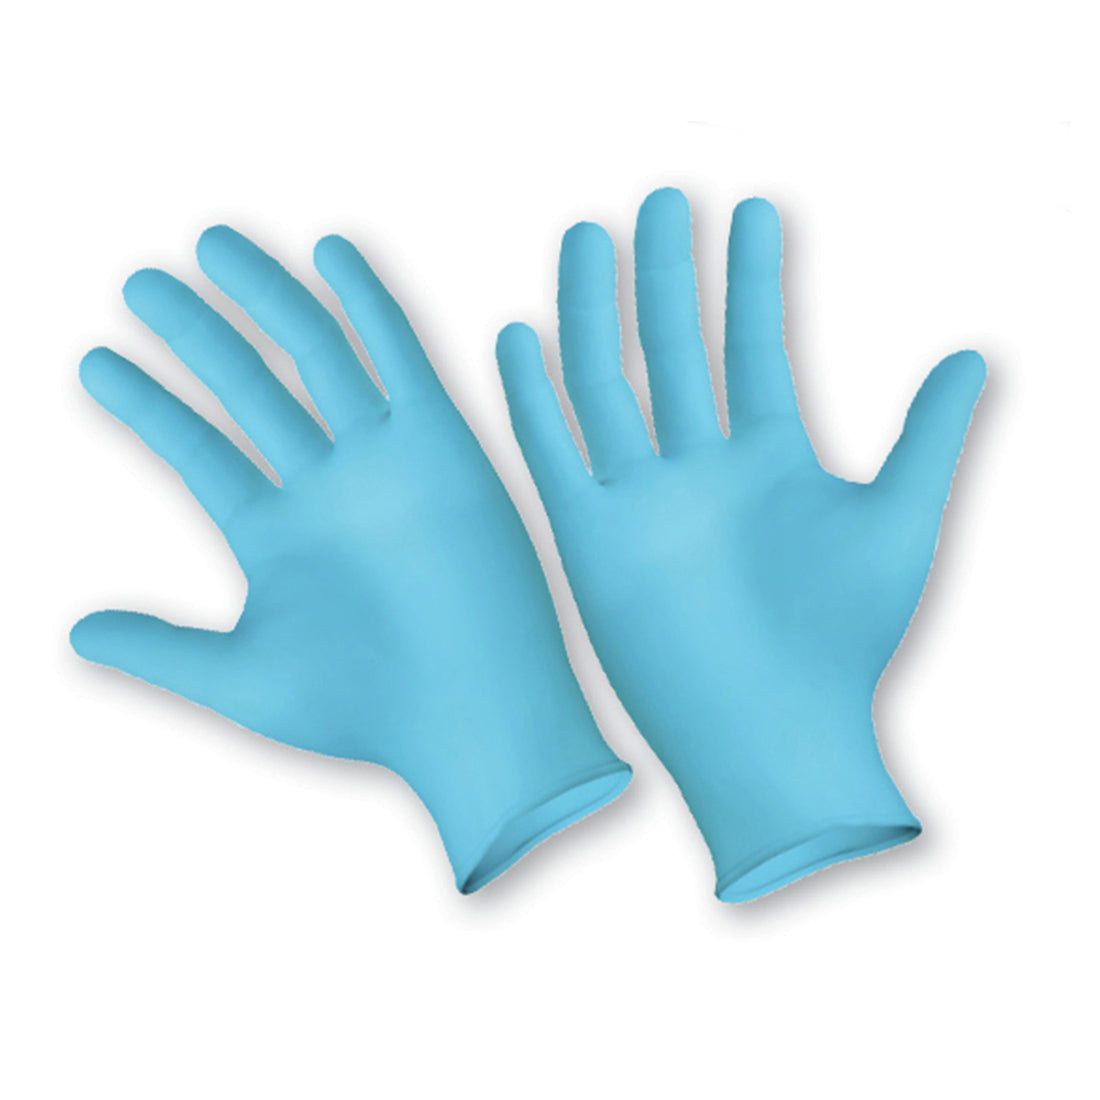 Blue Nitrile Disposable Gloves, Powder-Free Textured, 4 mil Latex-Free, Small, Box of 100